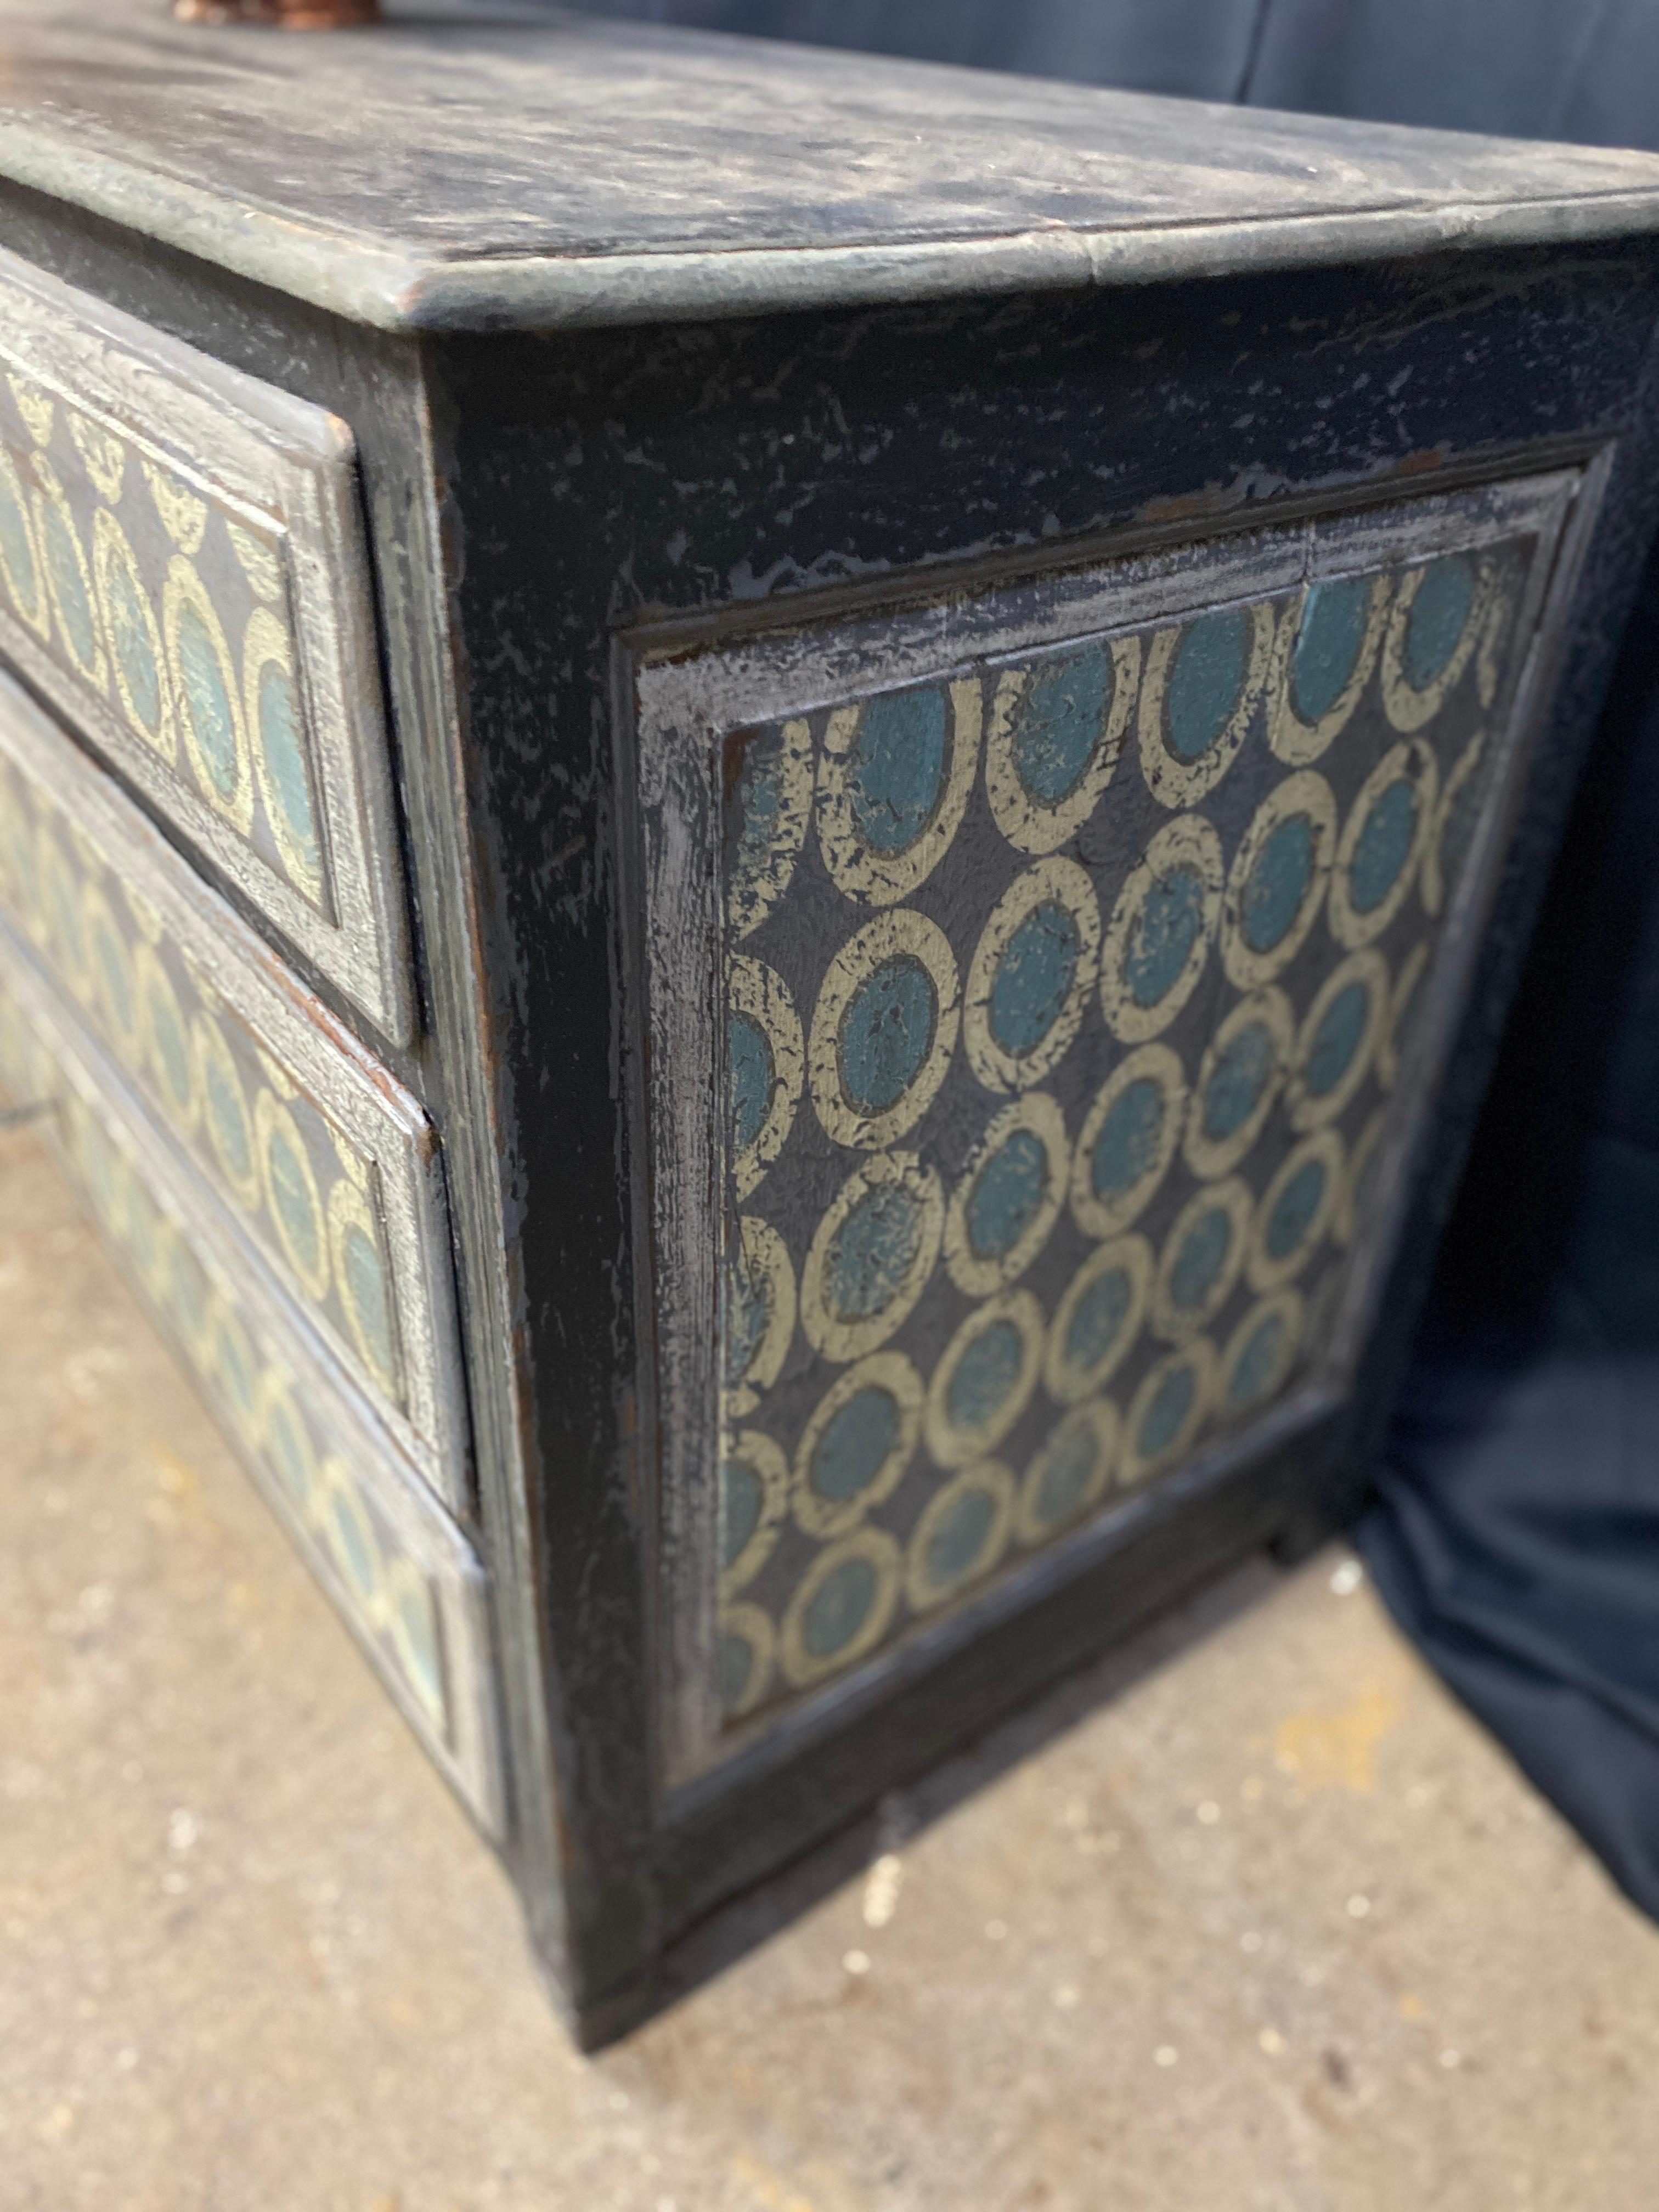 19th Century Louis xvi chest of drawers 3 patina drawers with different shapes and colors For Sale